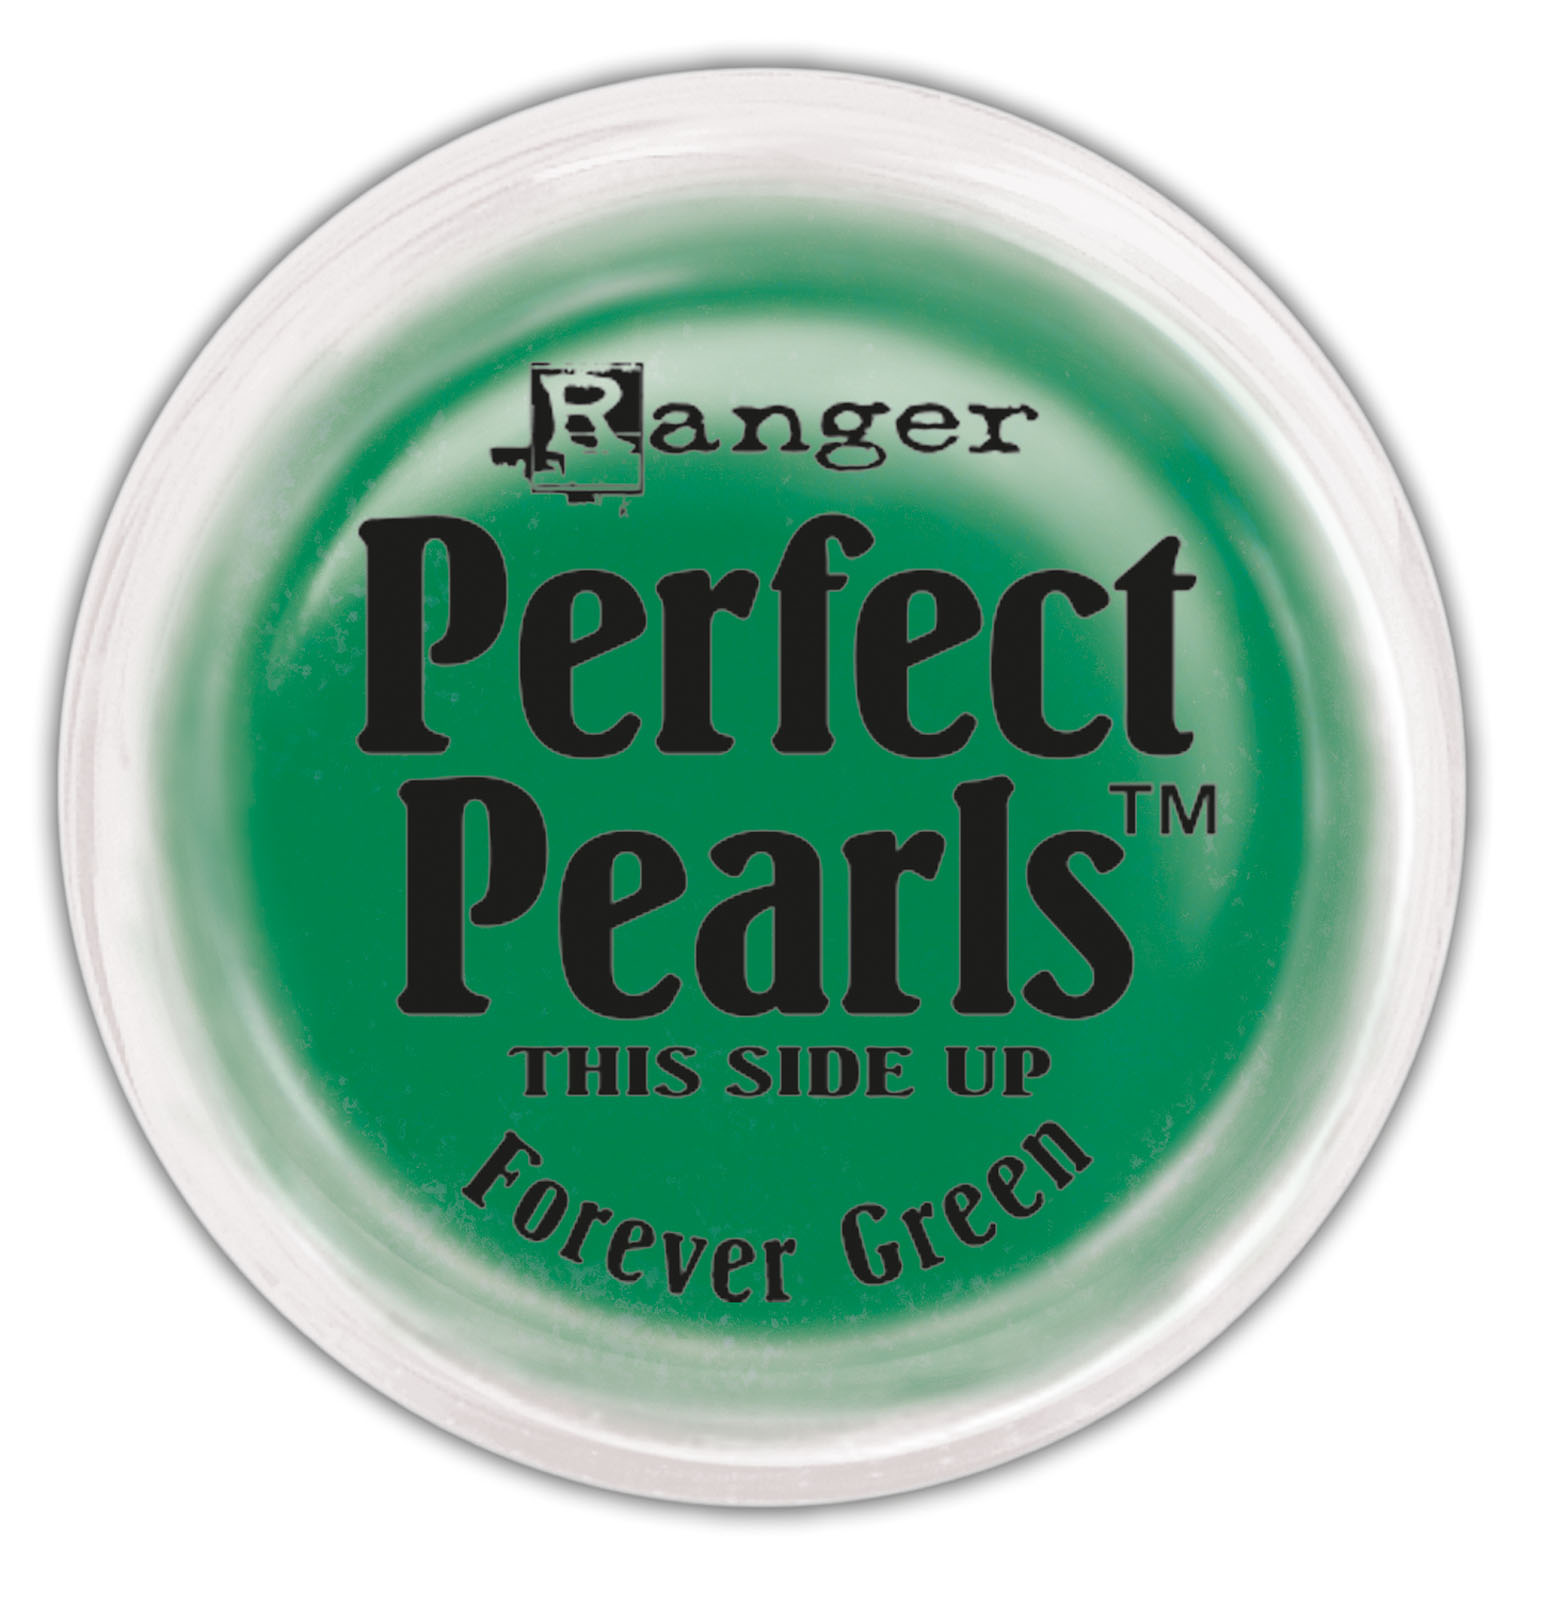 Ranger • Perfect pearls pigment powder Forever green